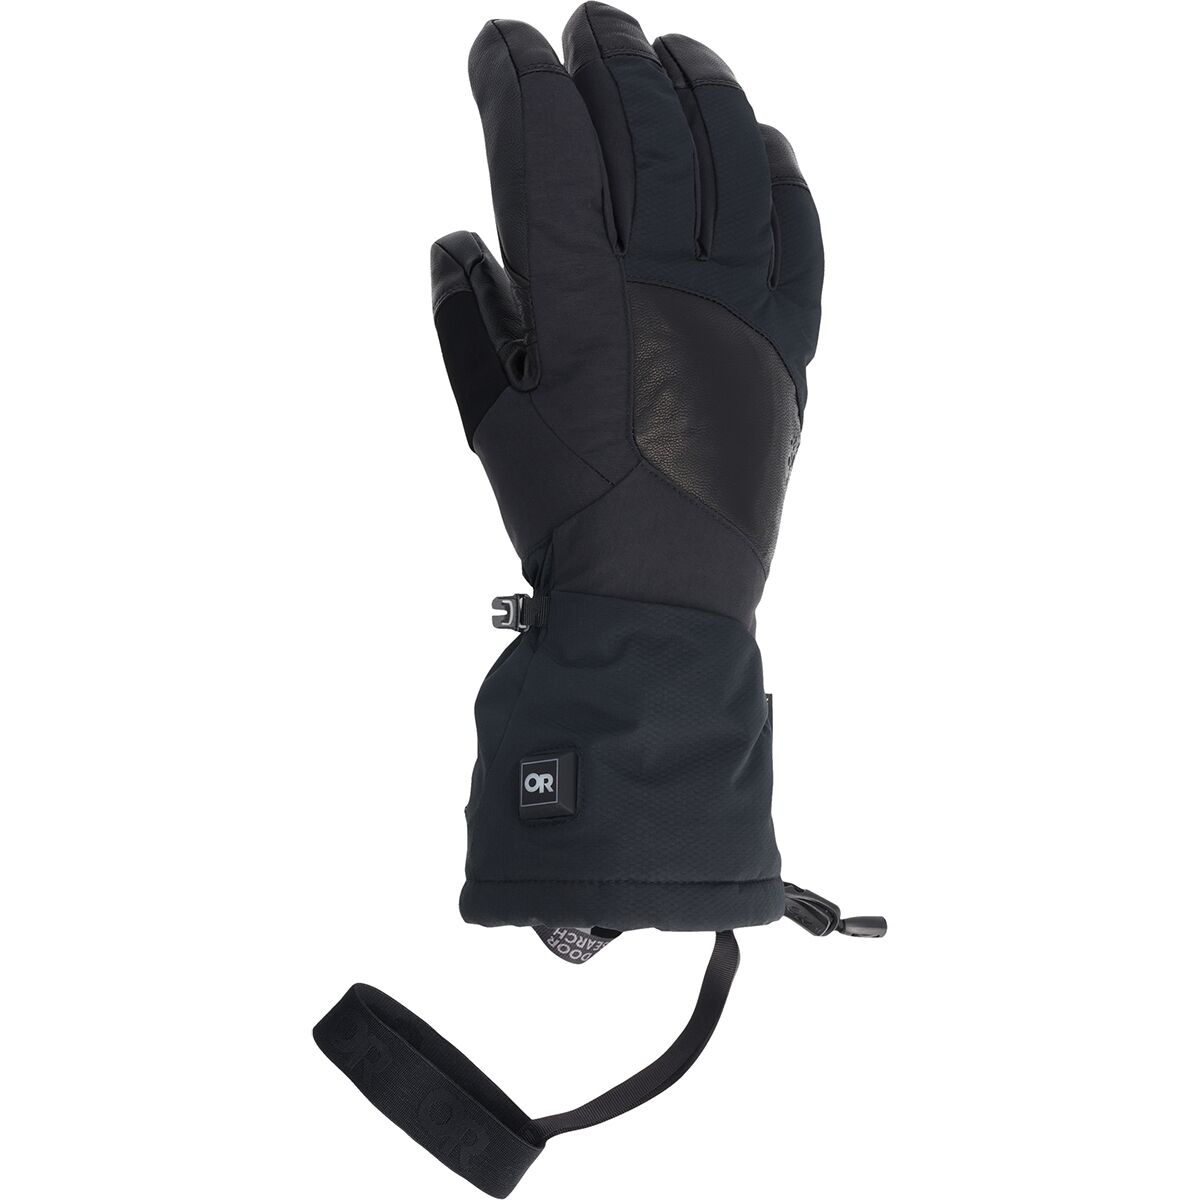 Outdoor Research Prevail Heated GORE-TEX Glove